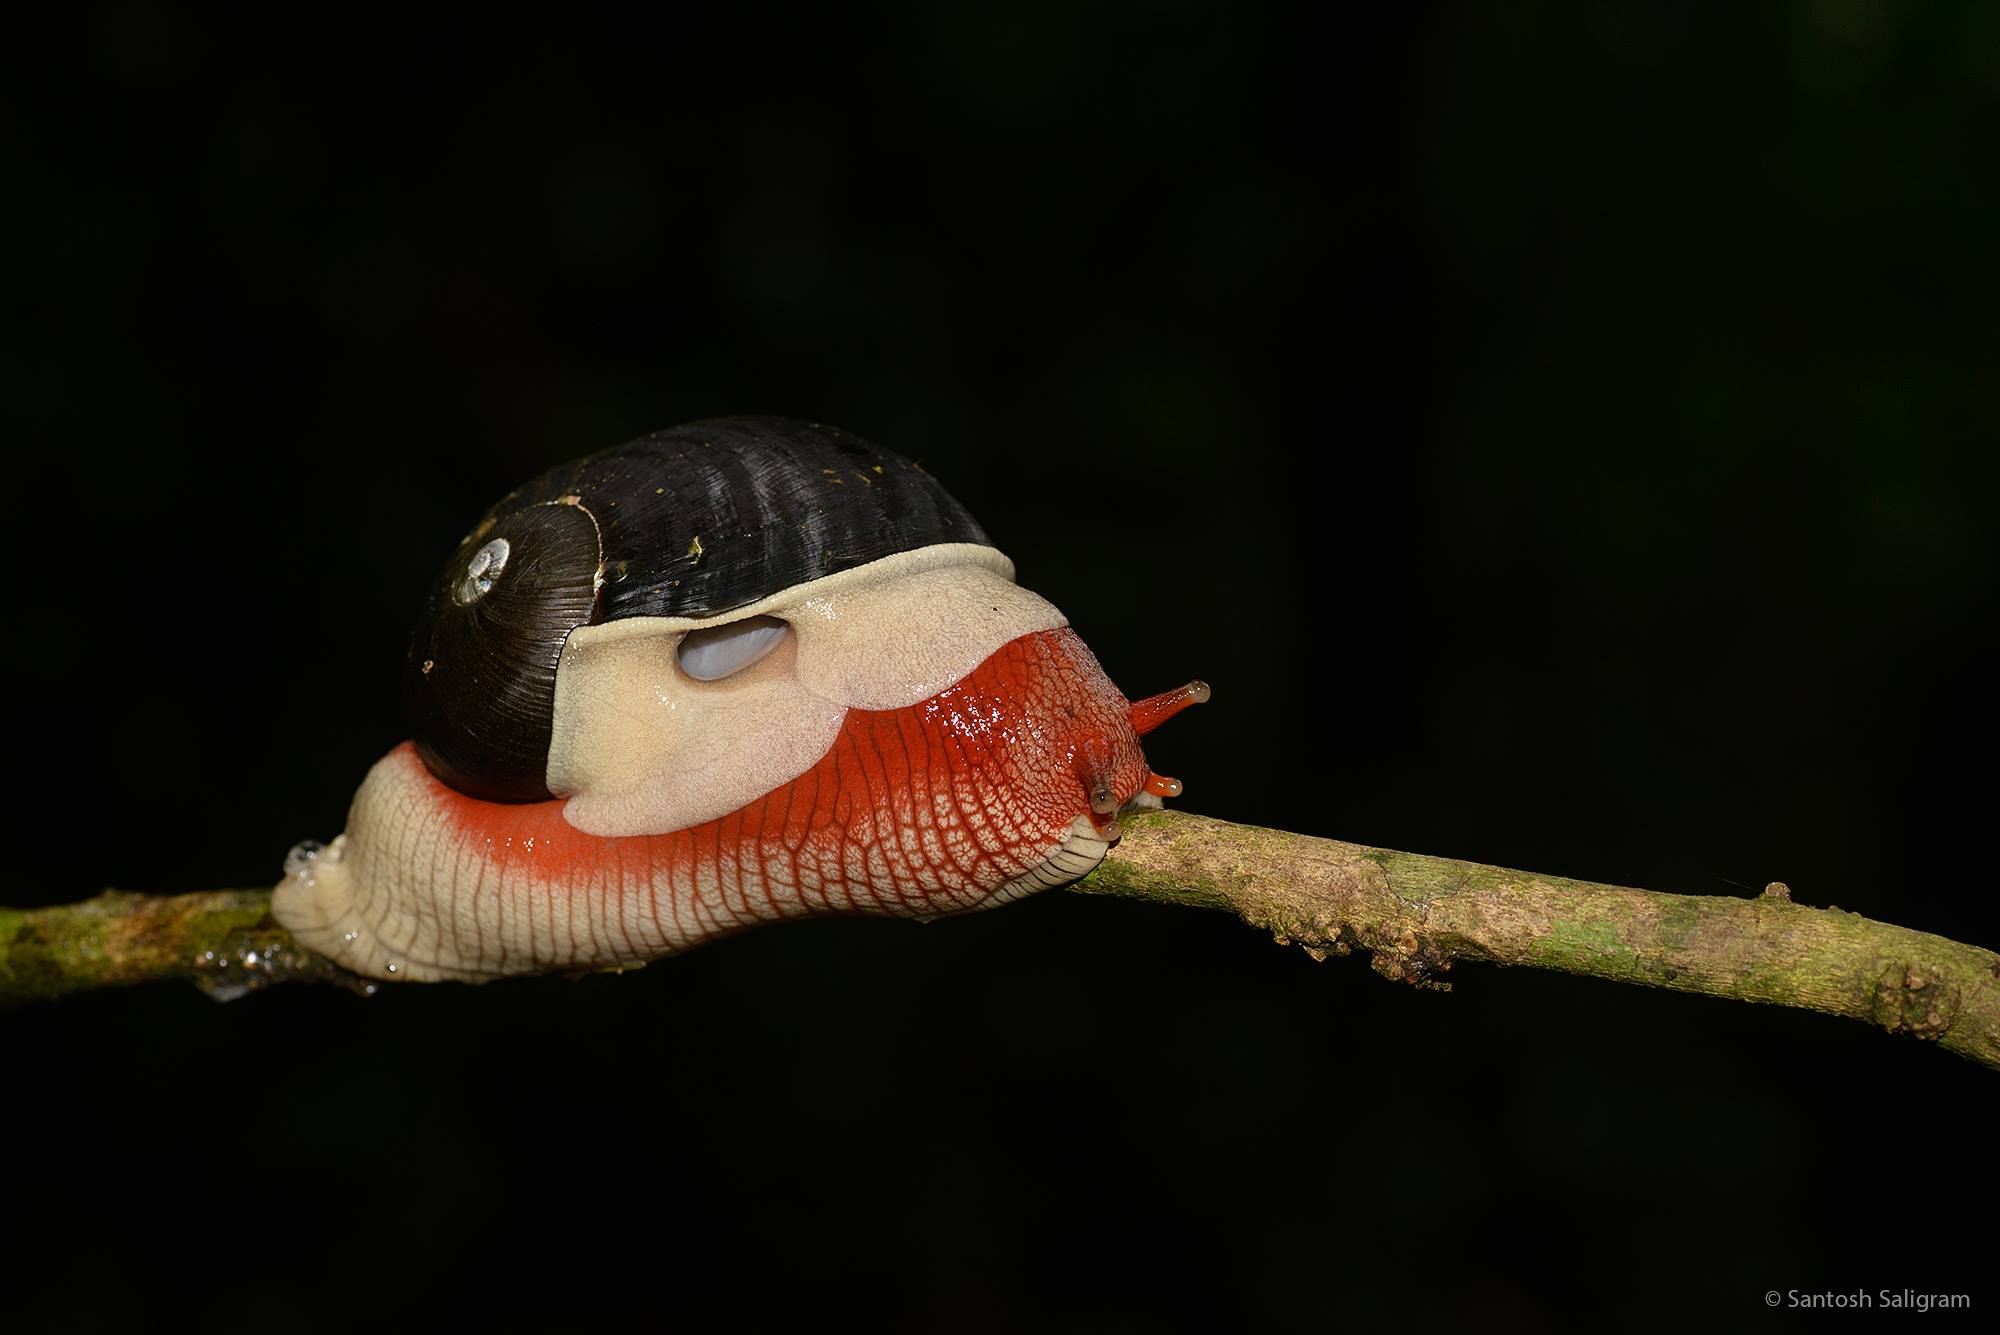 Vibrant Red Snail, Found it near Abbe Falls, Coorg